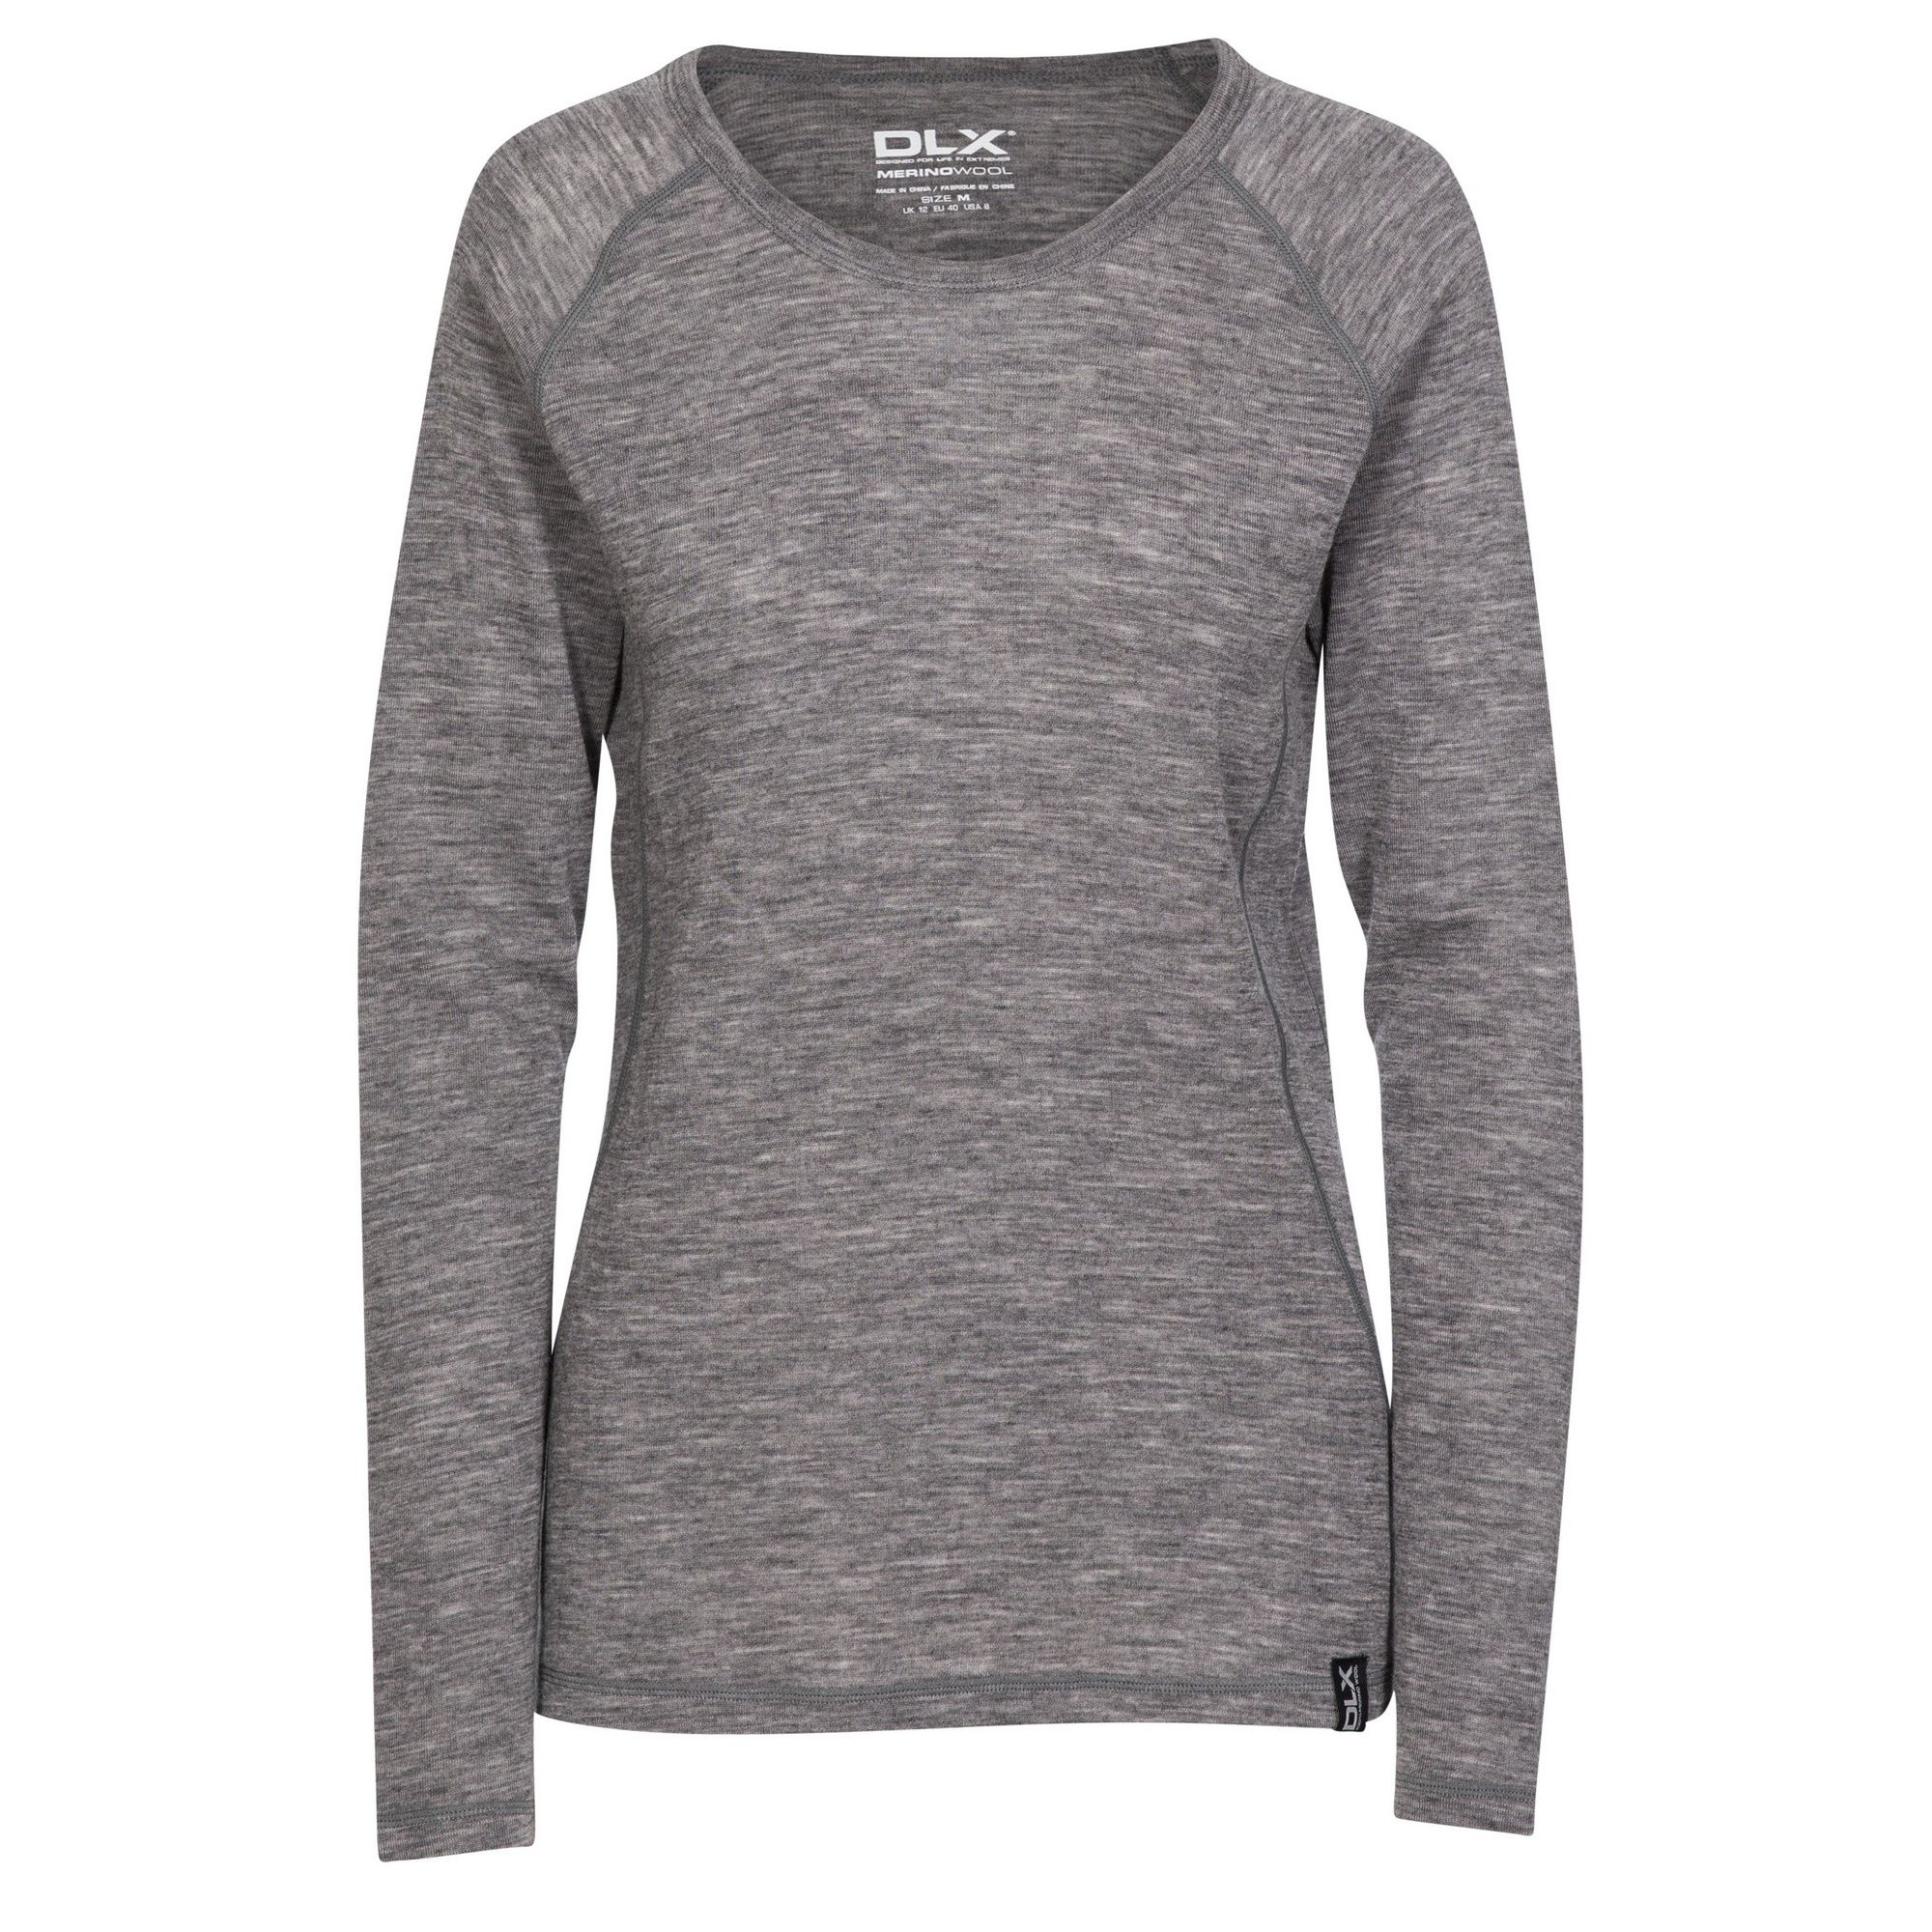 Long sleeve. Round neck. Flat seams for comfort. Branded boxed packaging. Natural wicking.  properties. 100% merino wool. Trespass Womens Chest Sizing (approx): XS/8 - 32in/81cm, S/10 - 34in/86cm, M/12 - 36in/91.4cm, L/14 - 38in/96.5cm, XL/16 - 40in/101.5cm, XXL/18 - 42in/106.5cm.